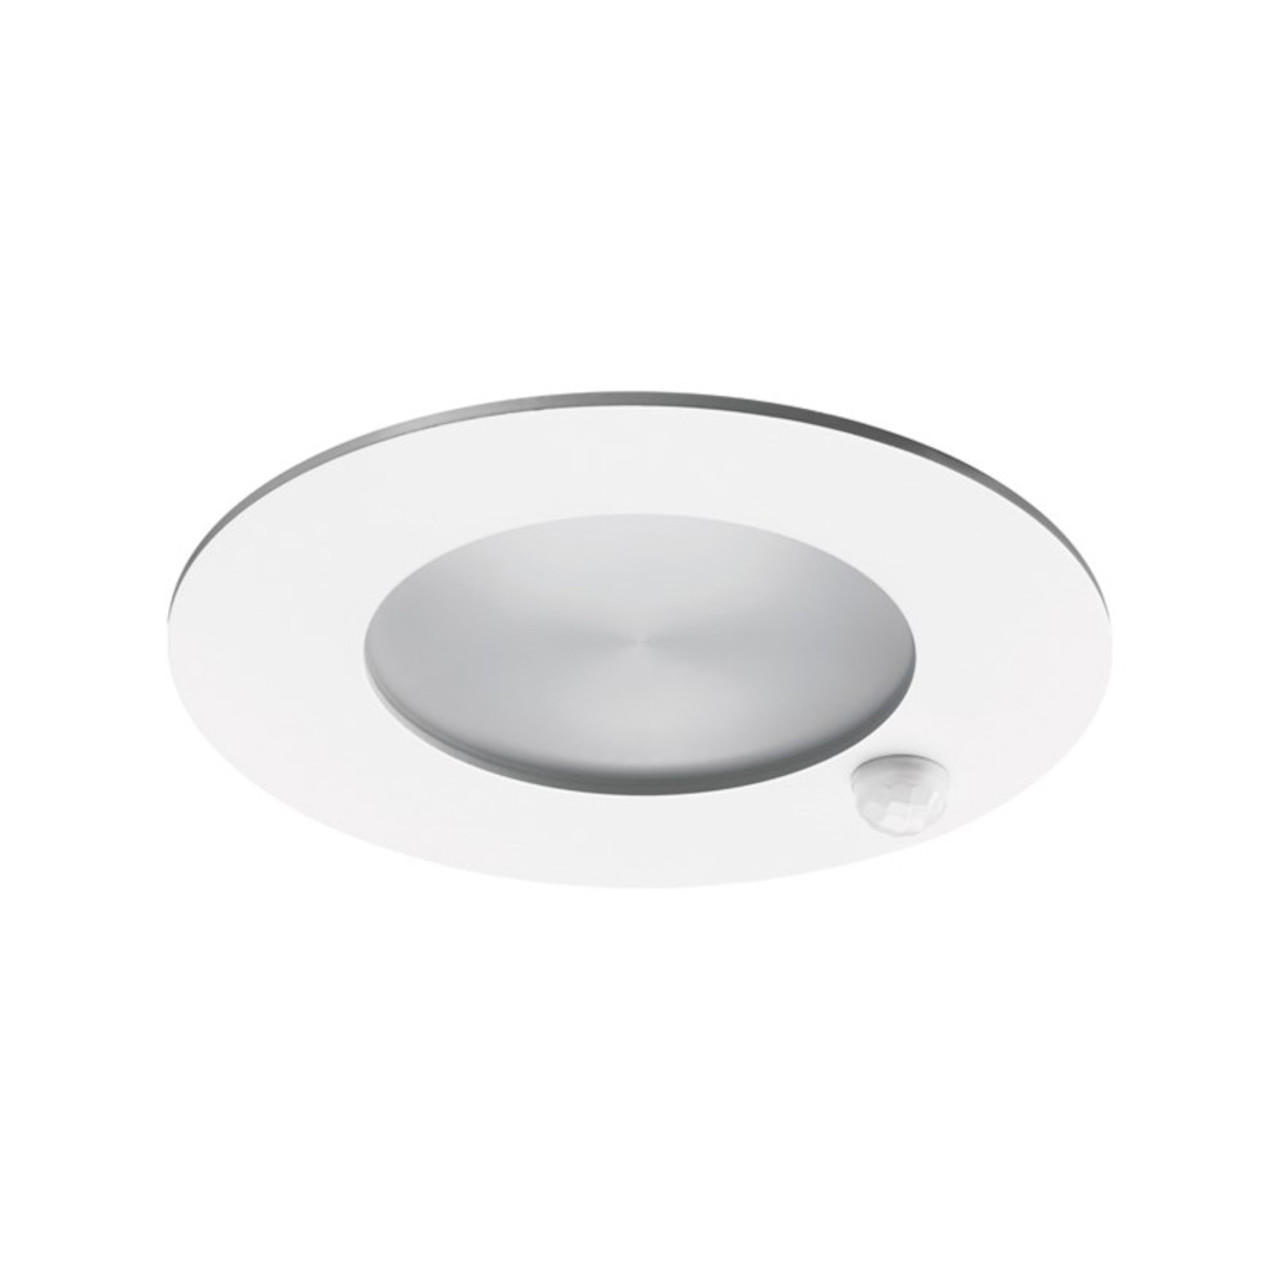 8W LED Downlight with Built-in PIR Sensor (time up to 8 mins) IP44 4000K